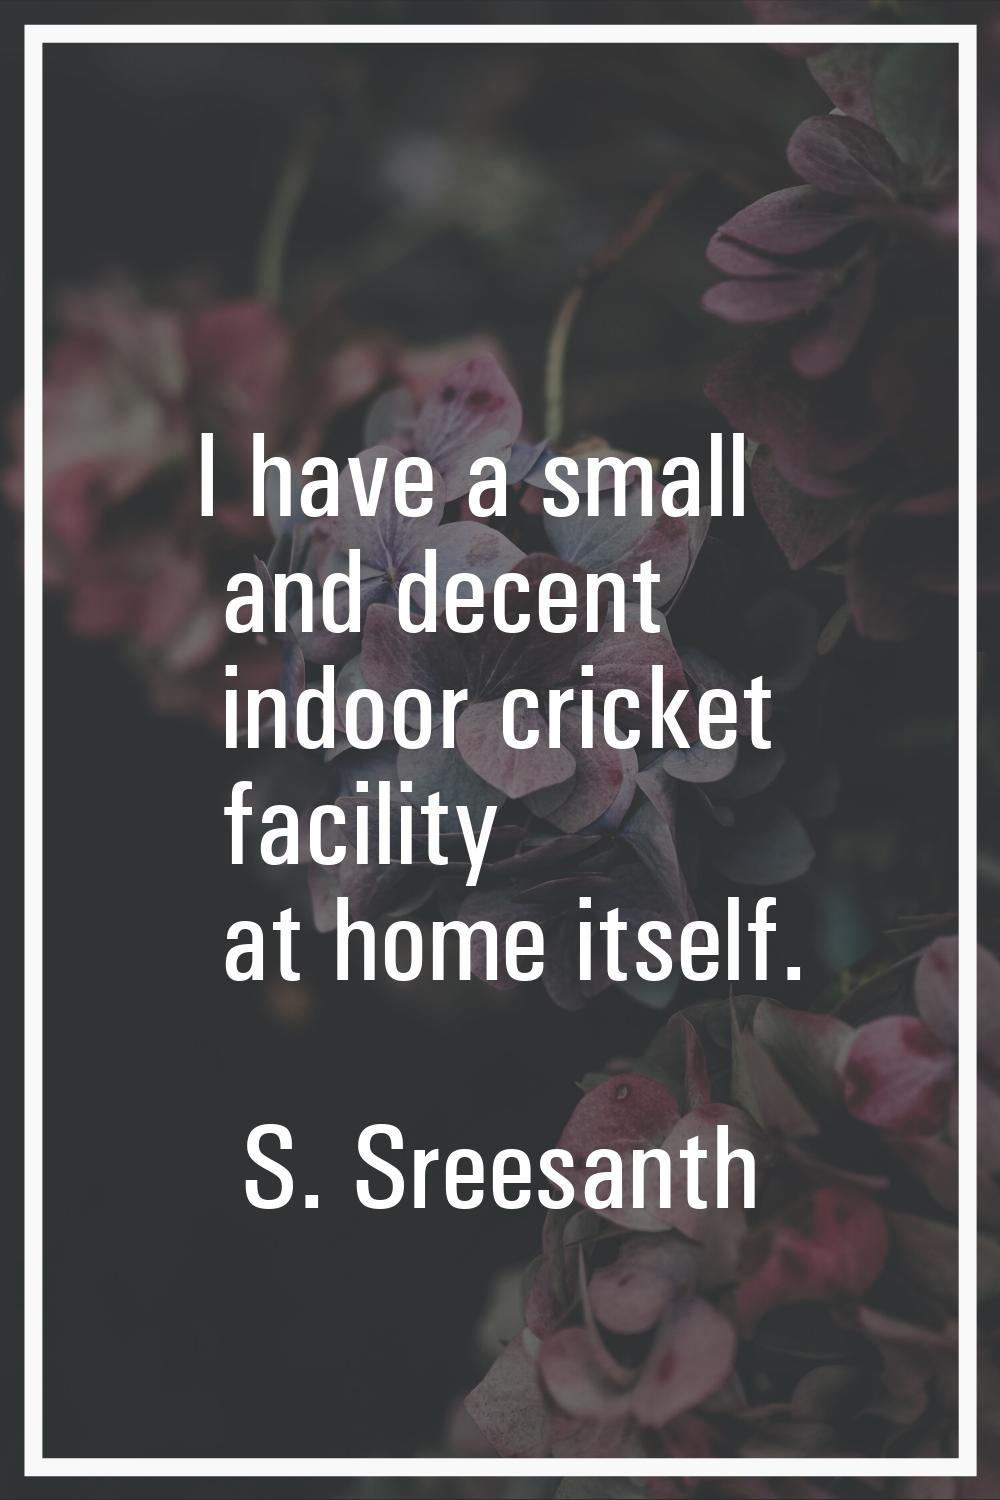 I have a small and decent indoor cricket facility at home itself.